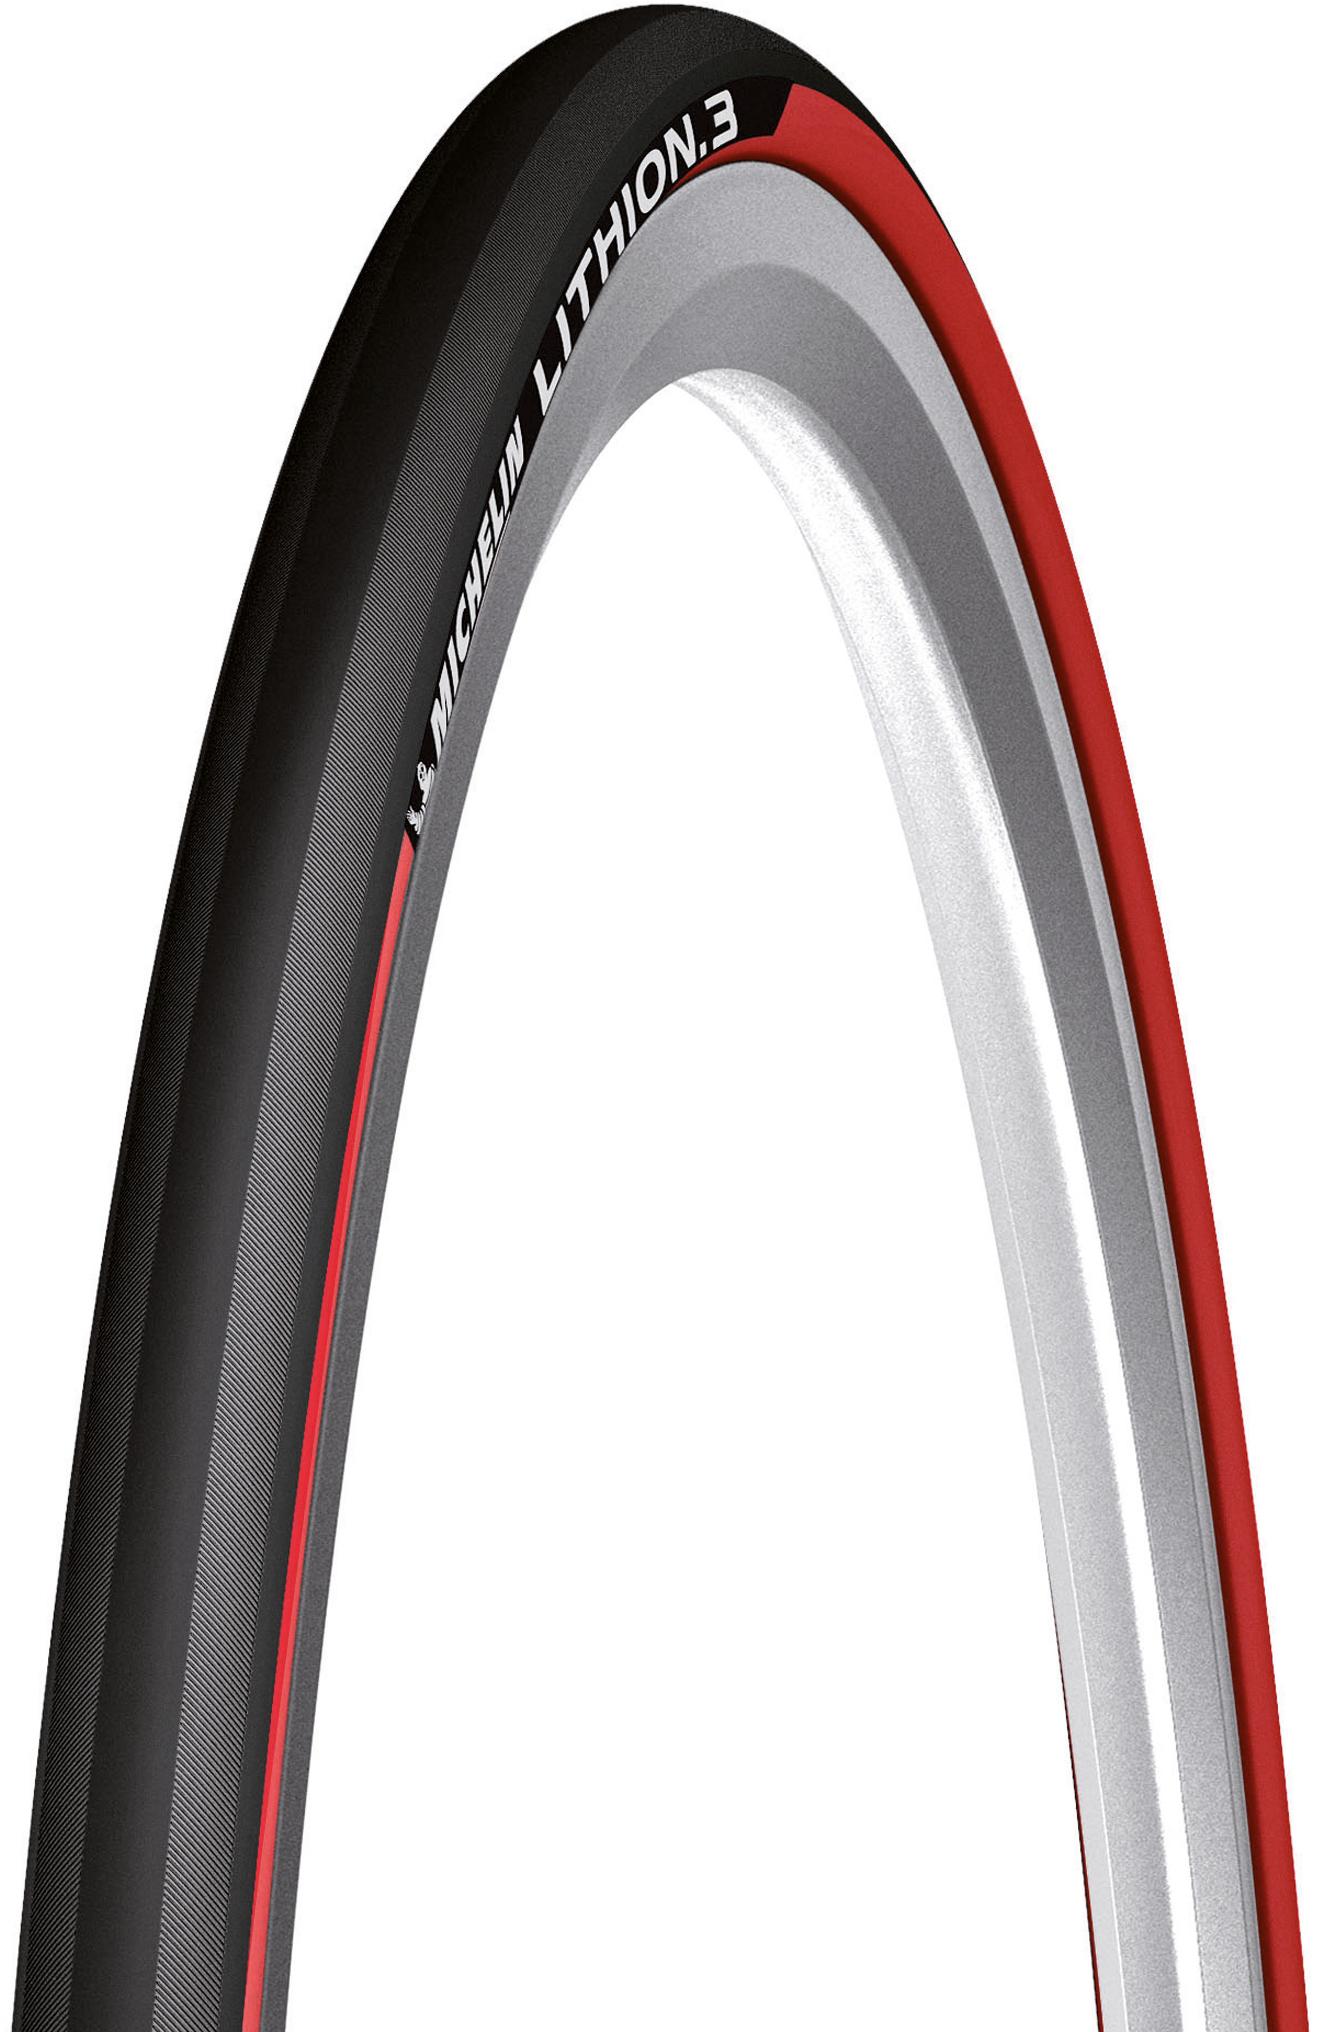 Michelin Lithion 3 Road Bike Tyre  Black/red